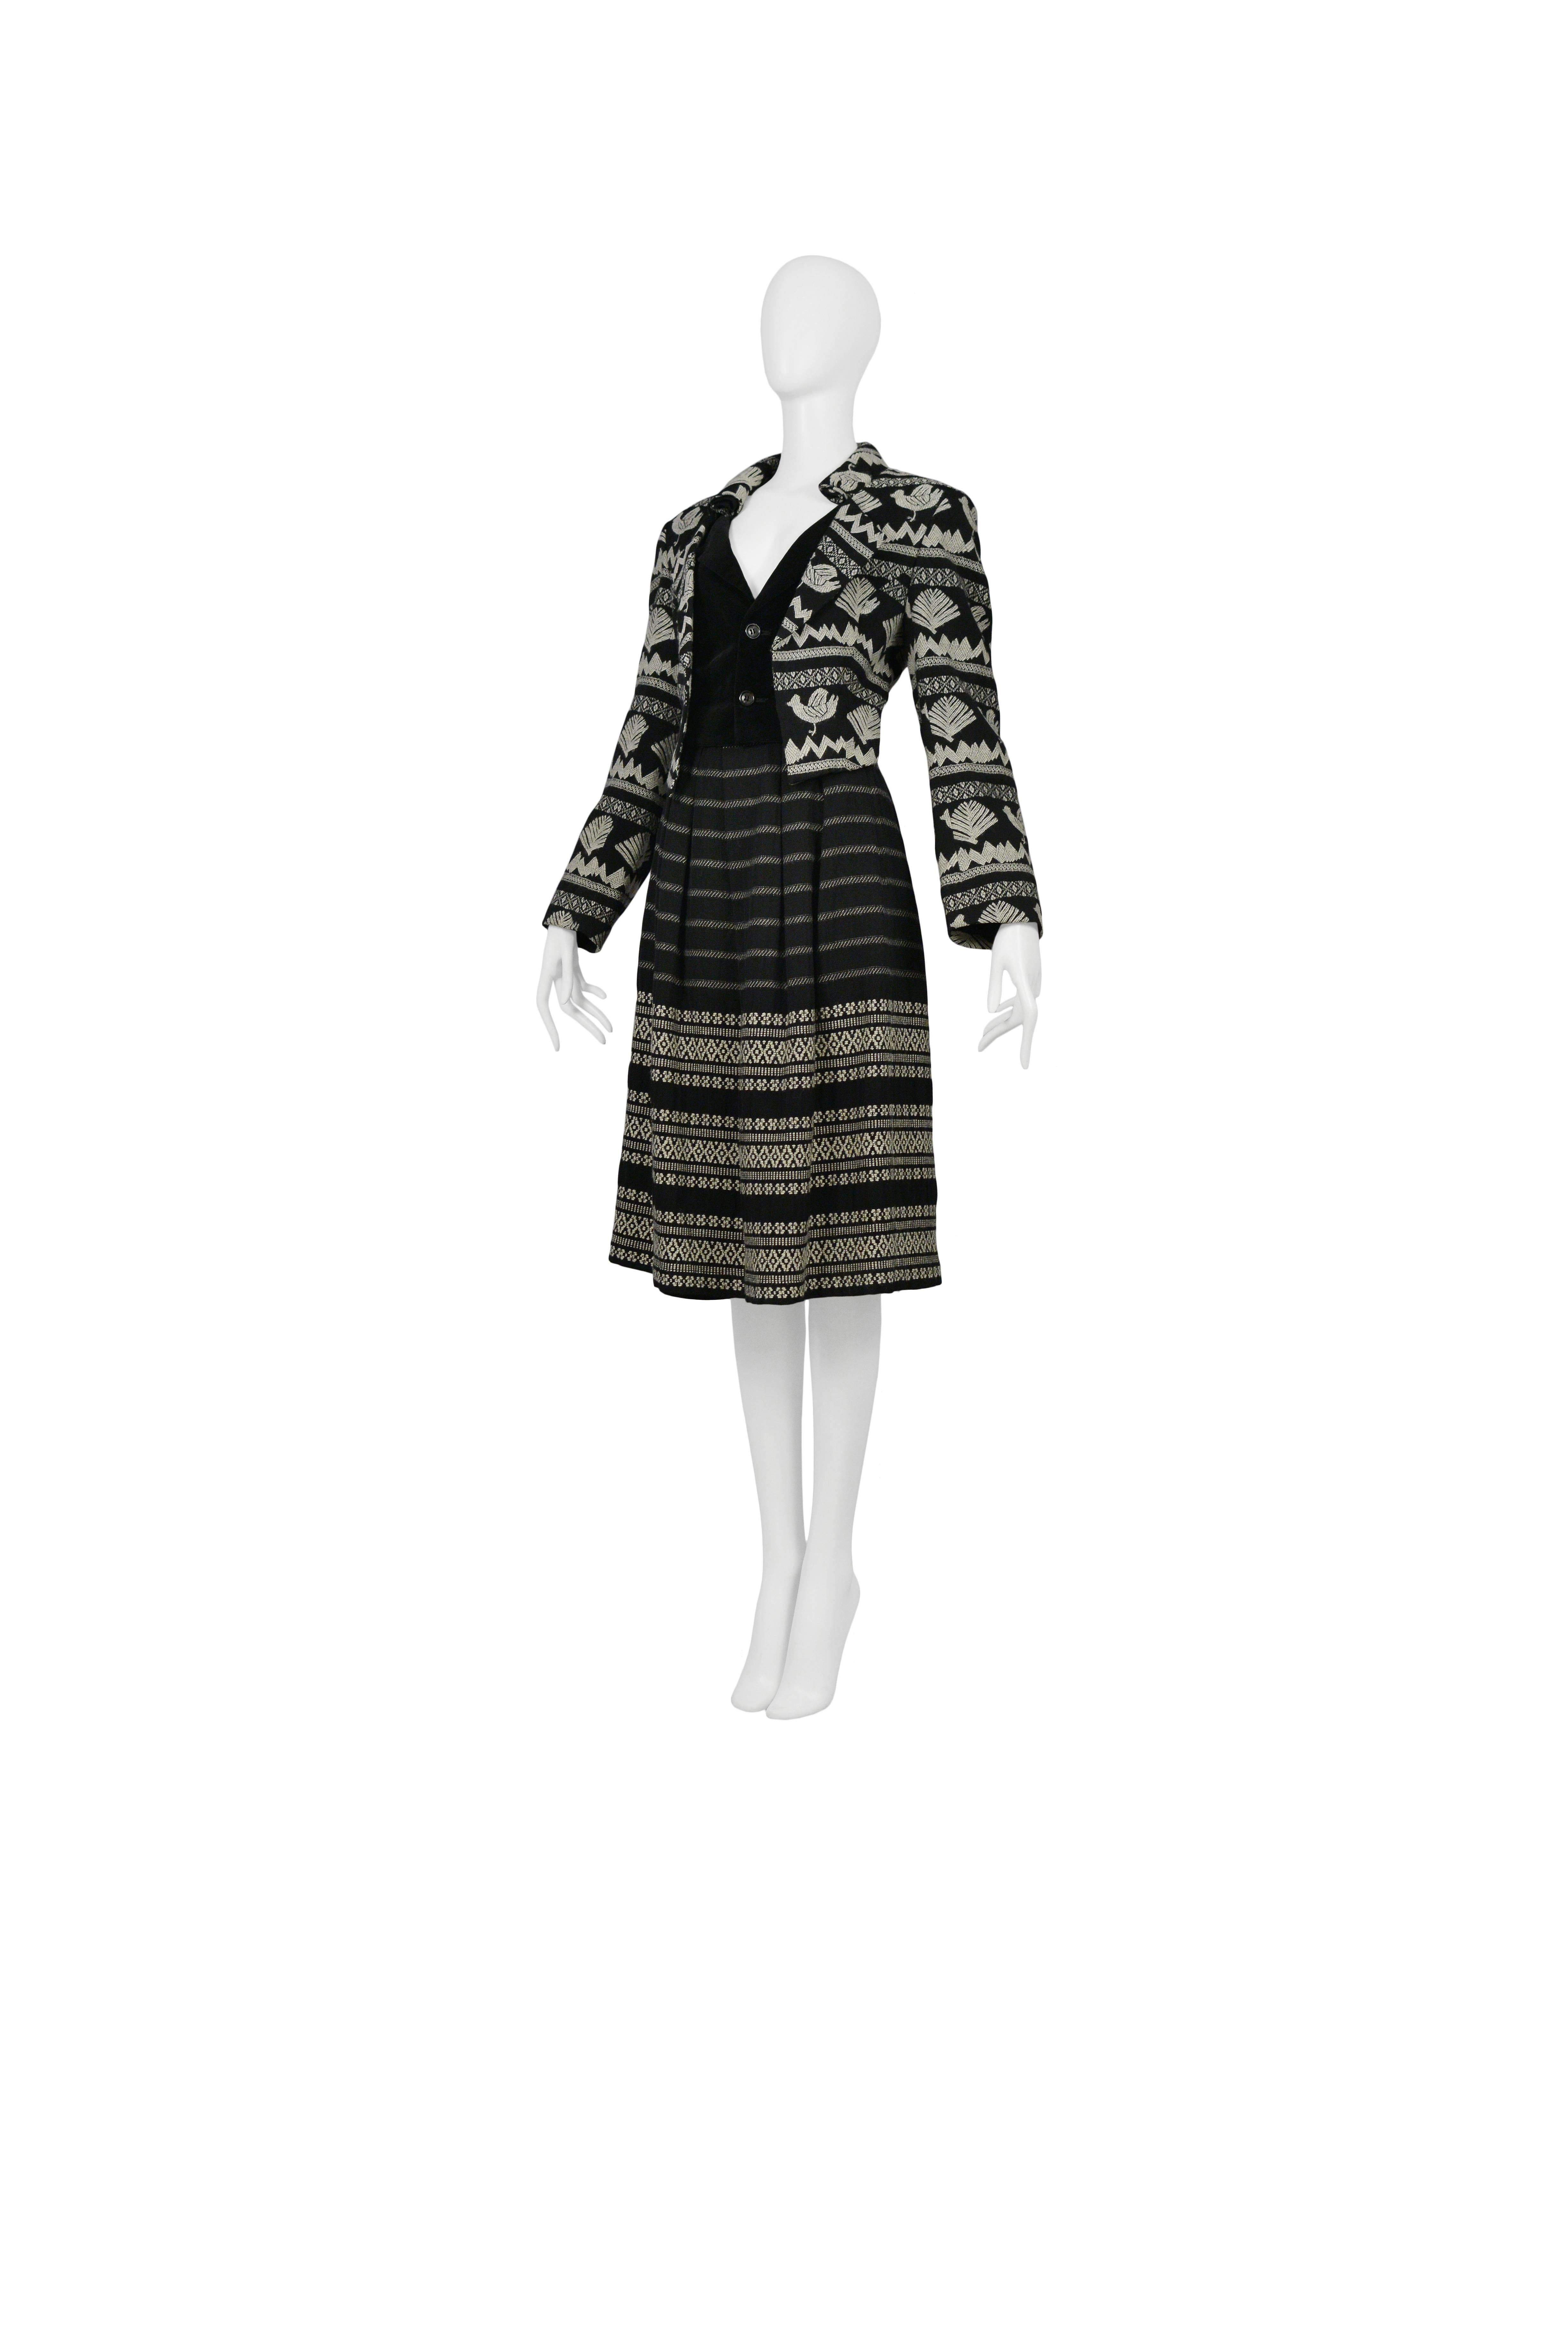 Women's Comme des Garcons Black and White Embroidered Ensemble, 1989